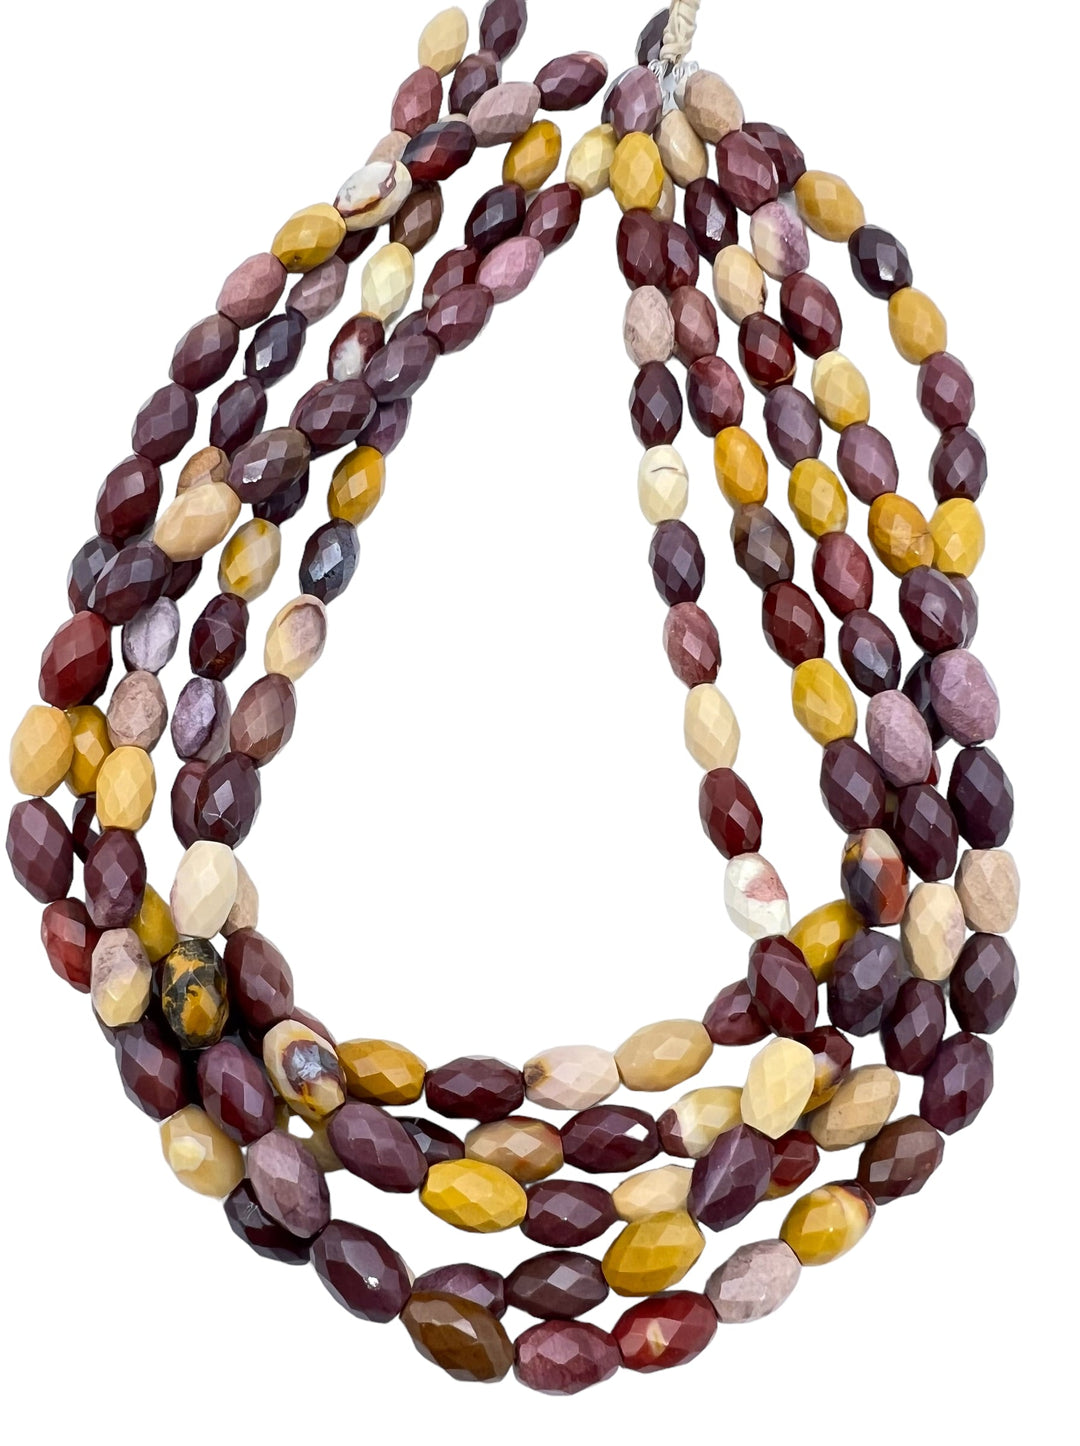 High Quality Mookaite (Australia) Hand Faceted Barrel Beads